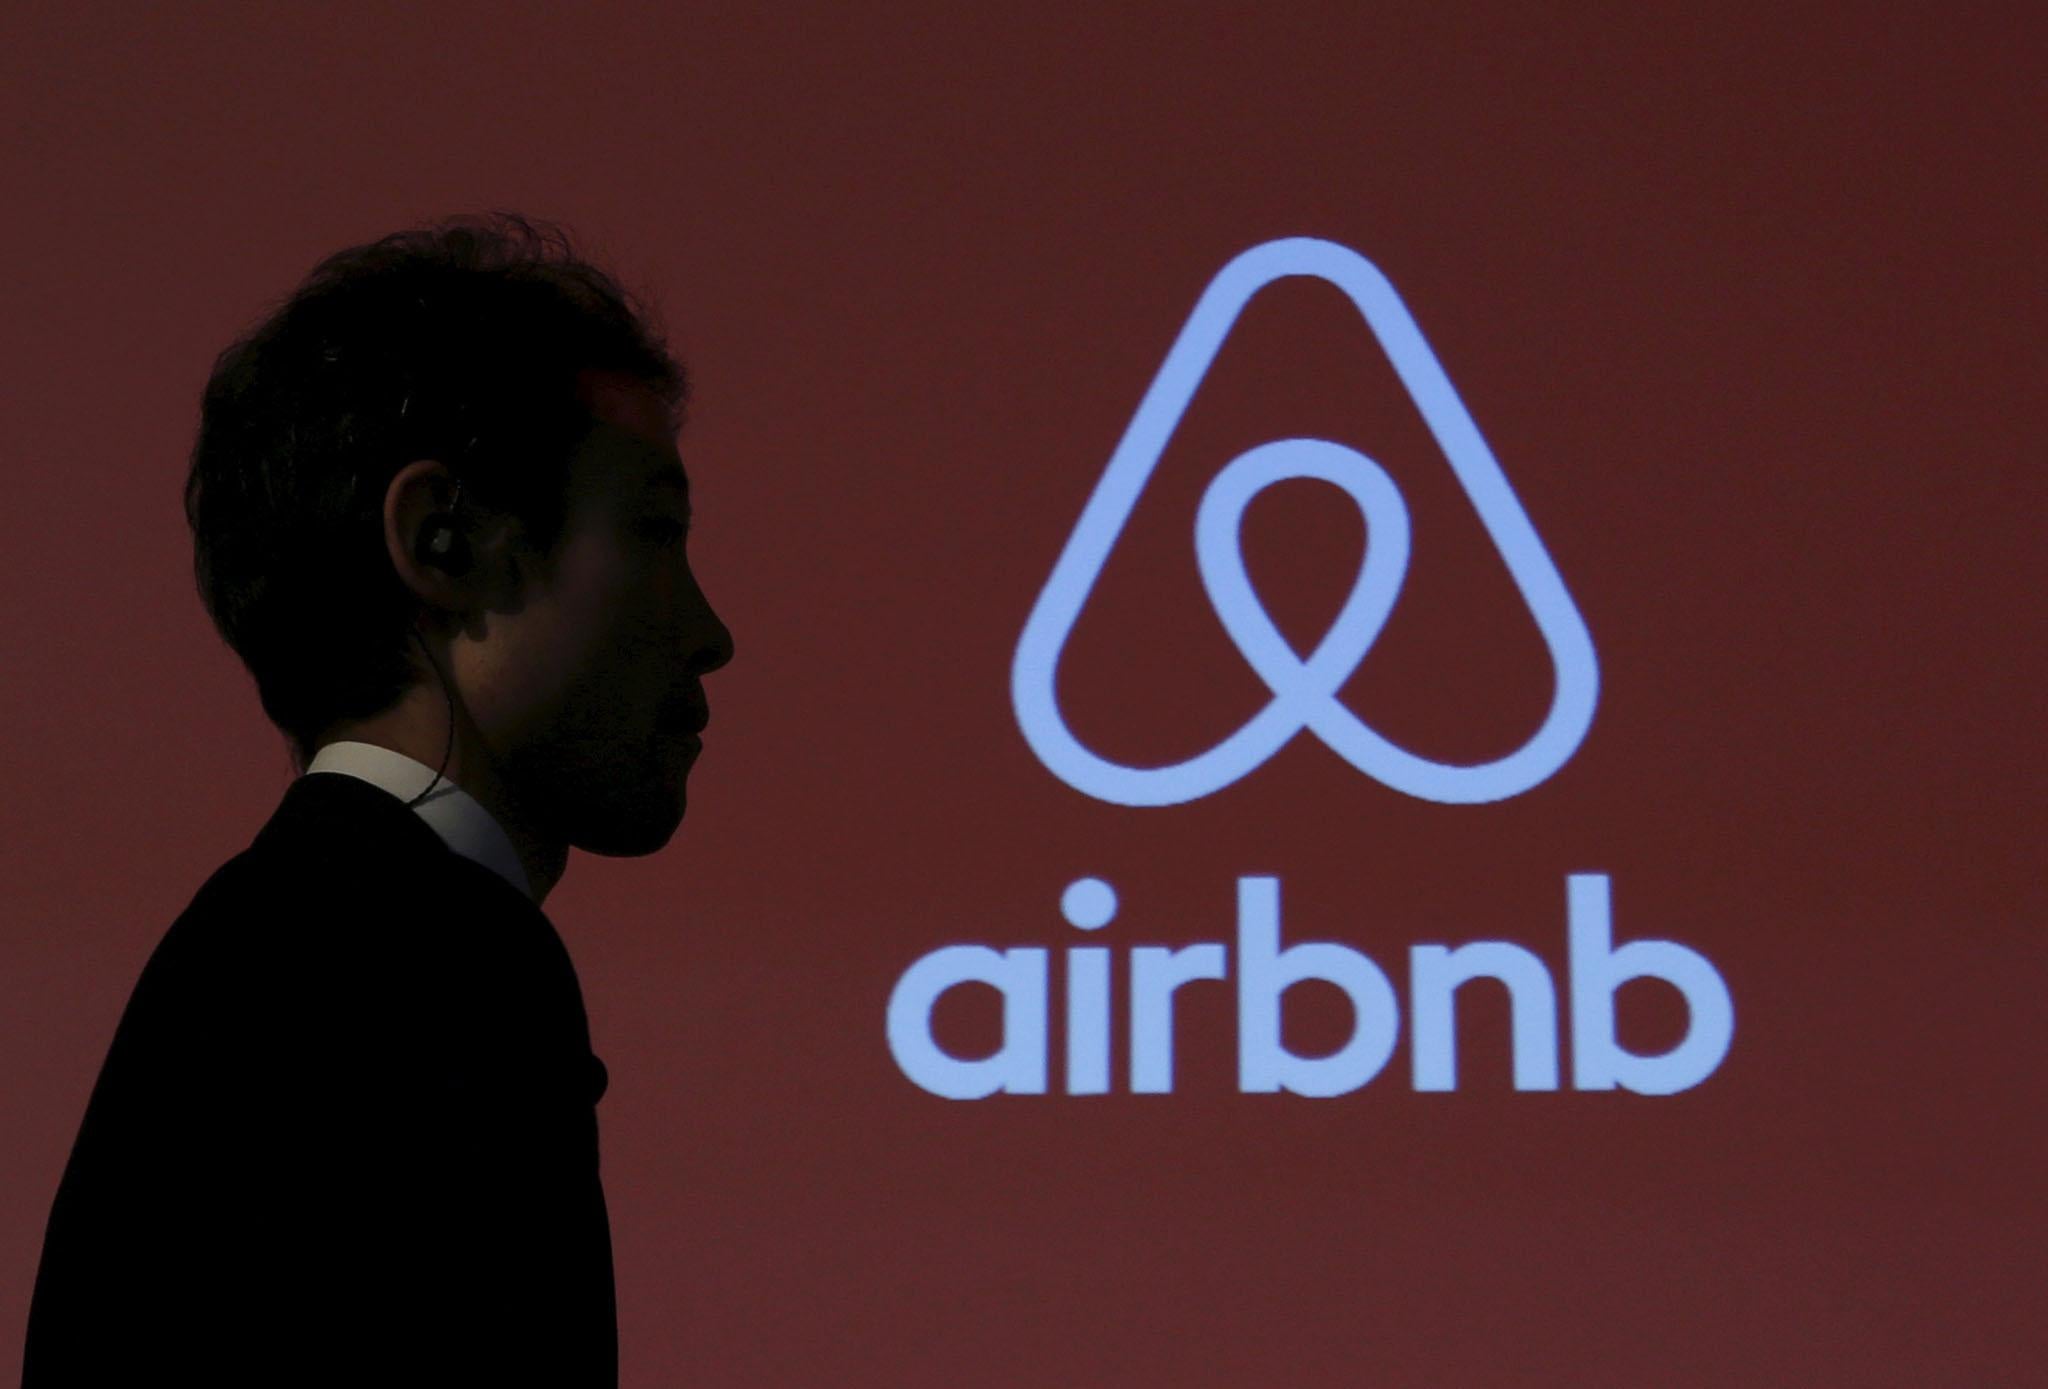 Airbnb said it has taken steps to remove users with white supremacists leanings